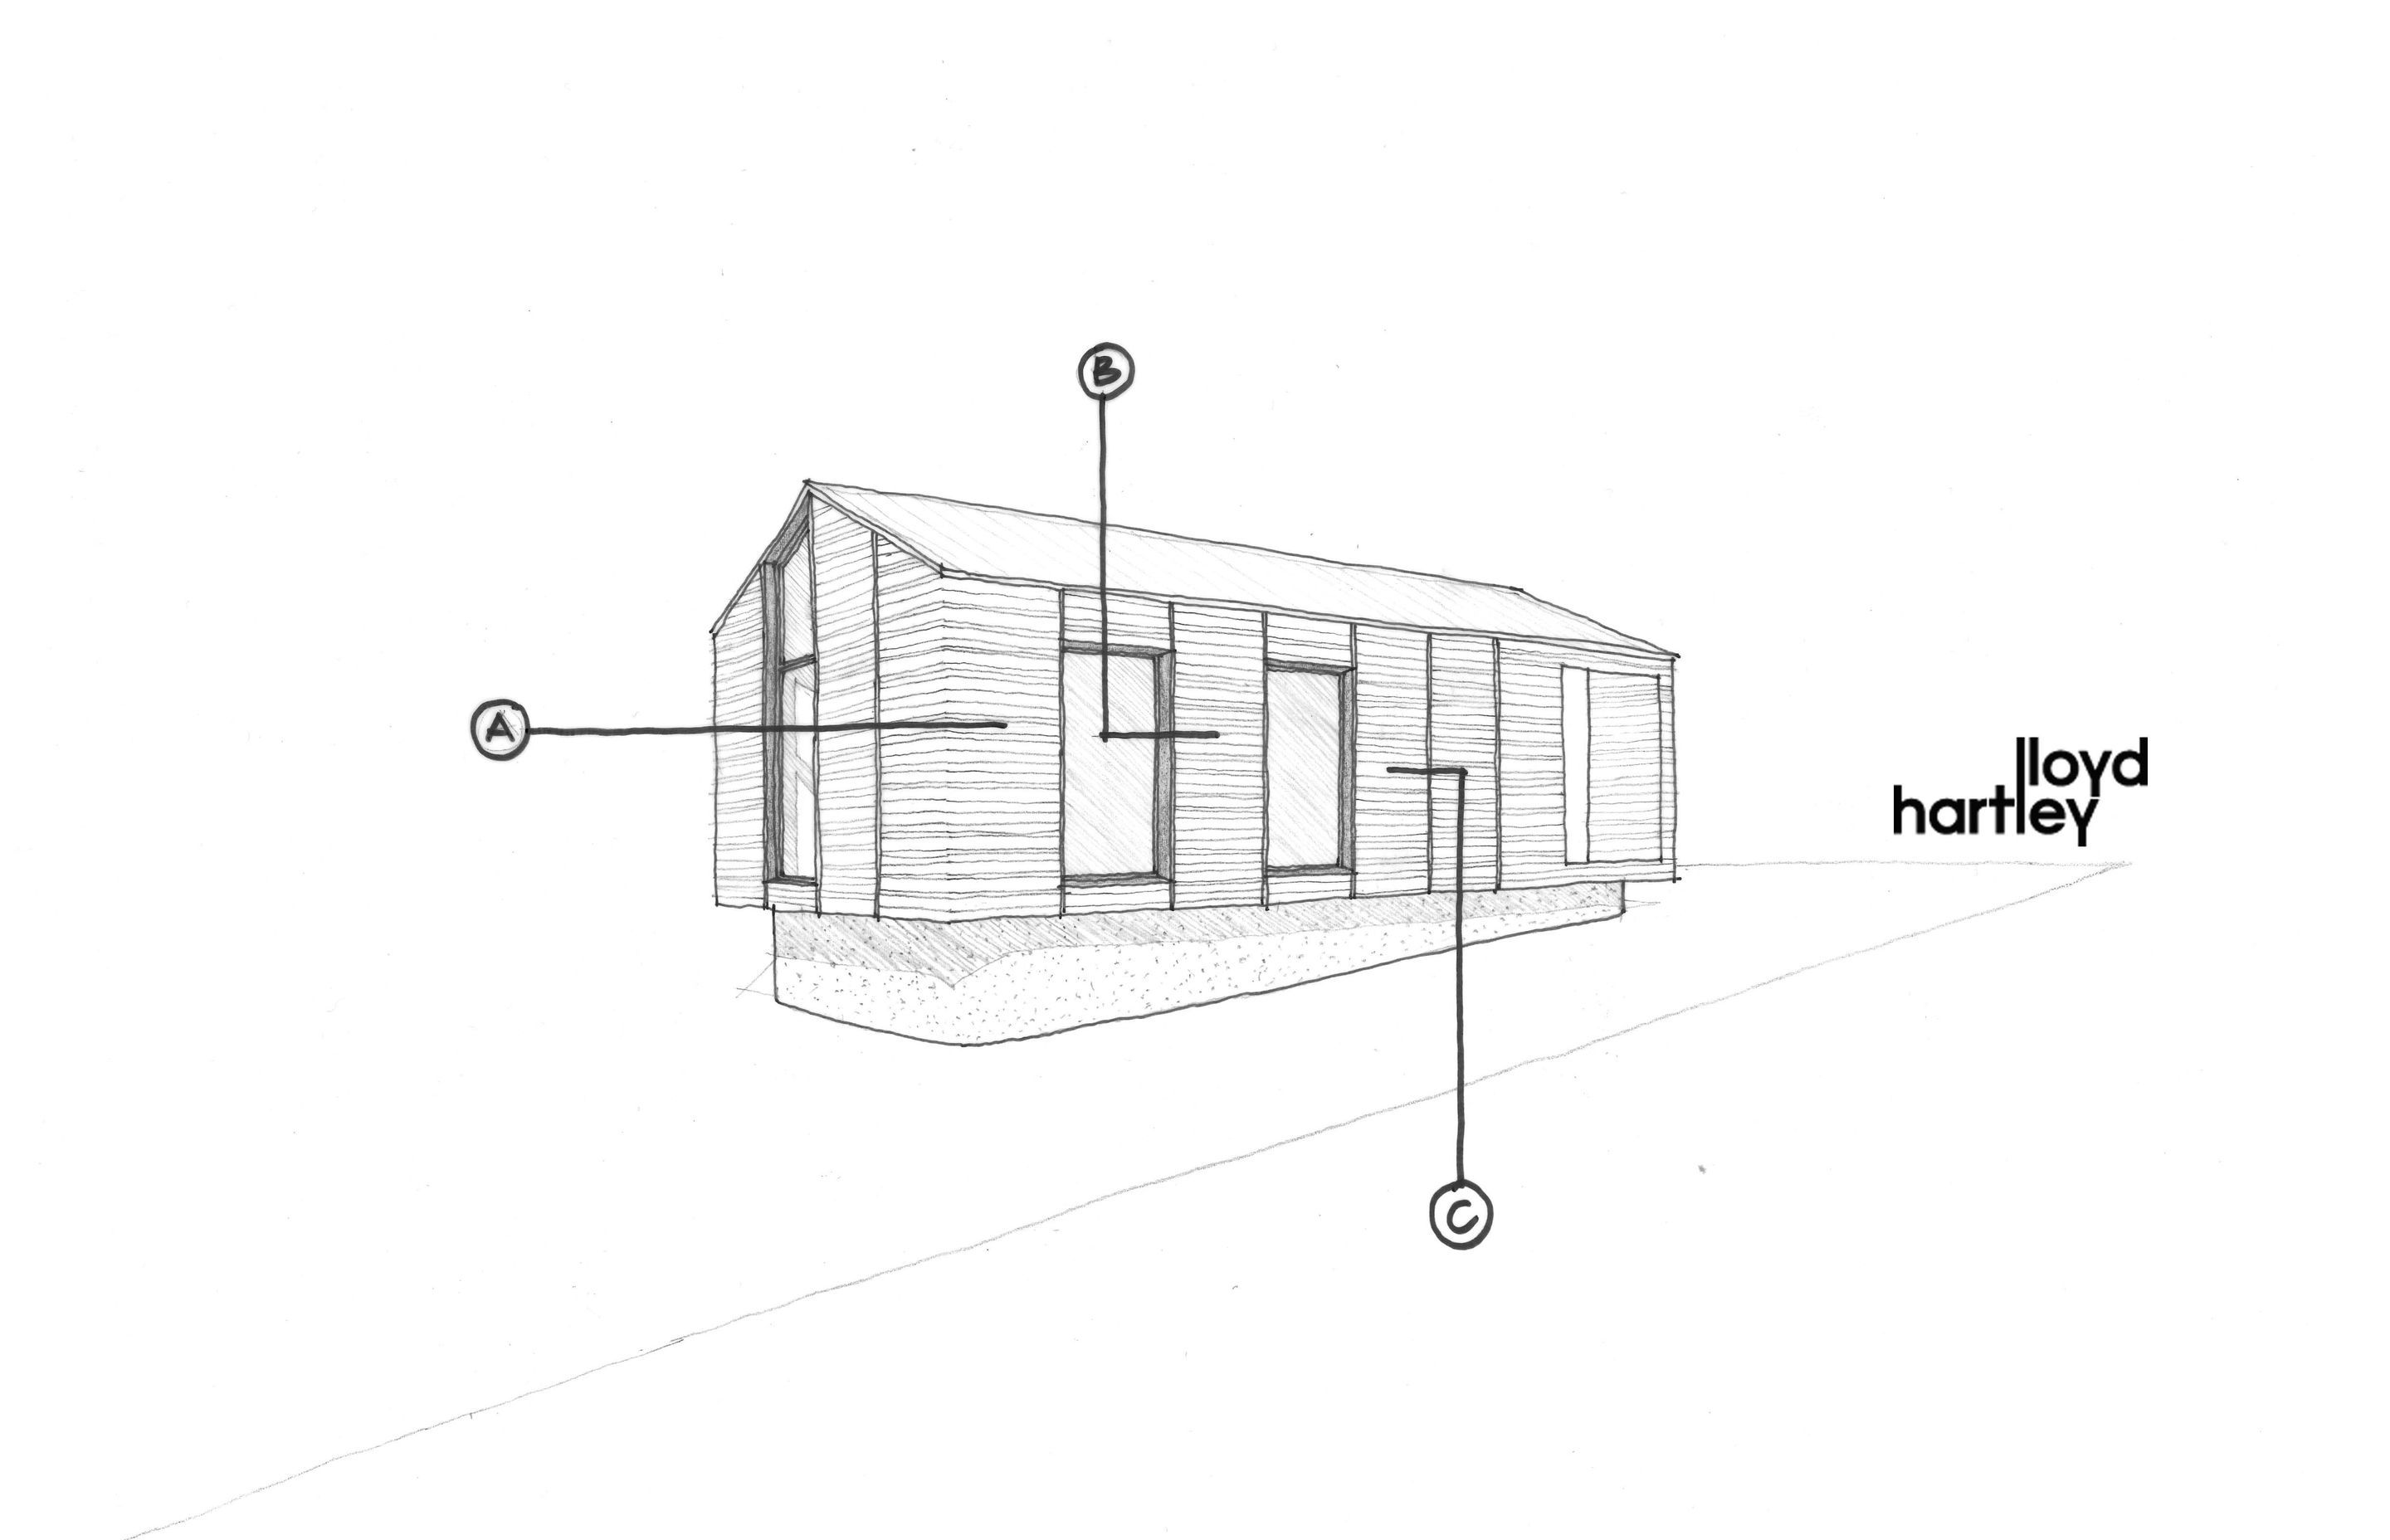 Lloyd Hartley's elevation sketch shows the transition from weatherboard to weatherboard. The A, B and C relate to the detail sketch above.